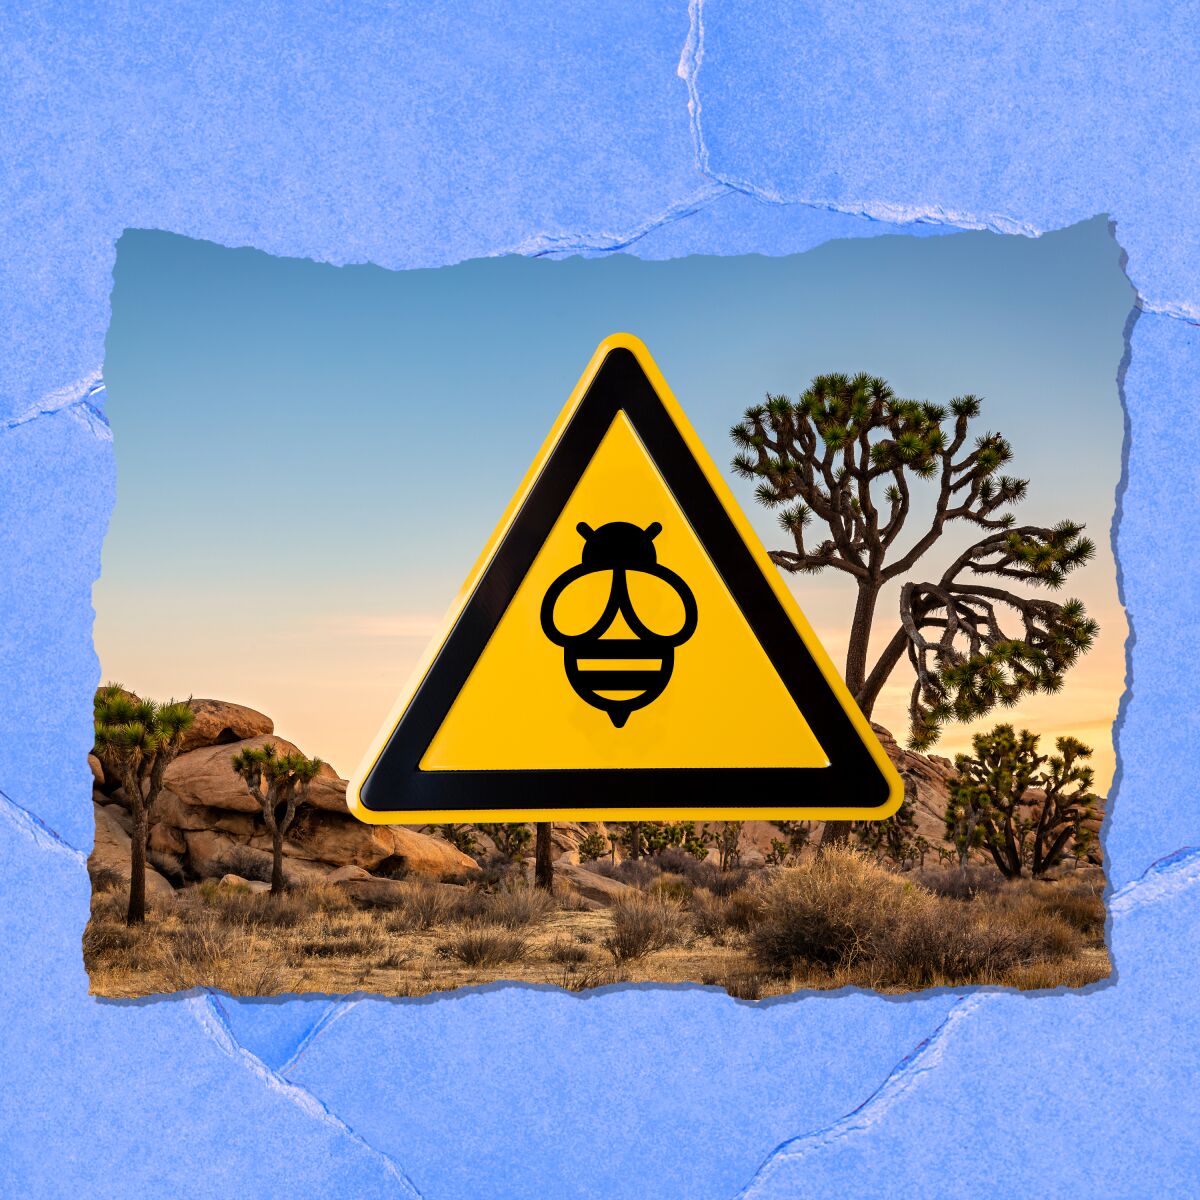 A warning sign on top of a Joshua tree.